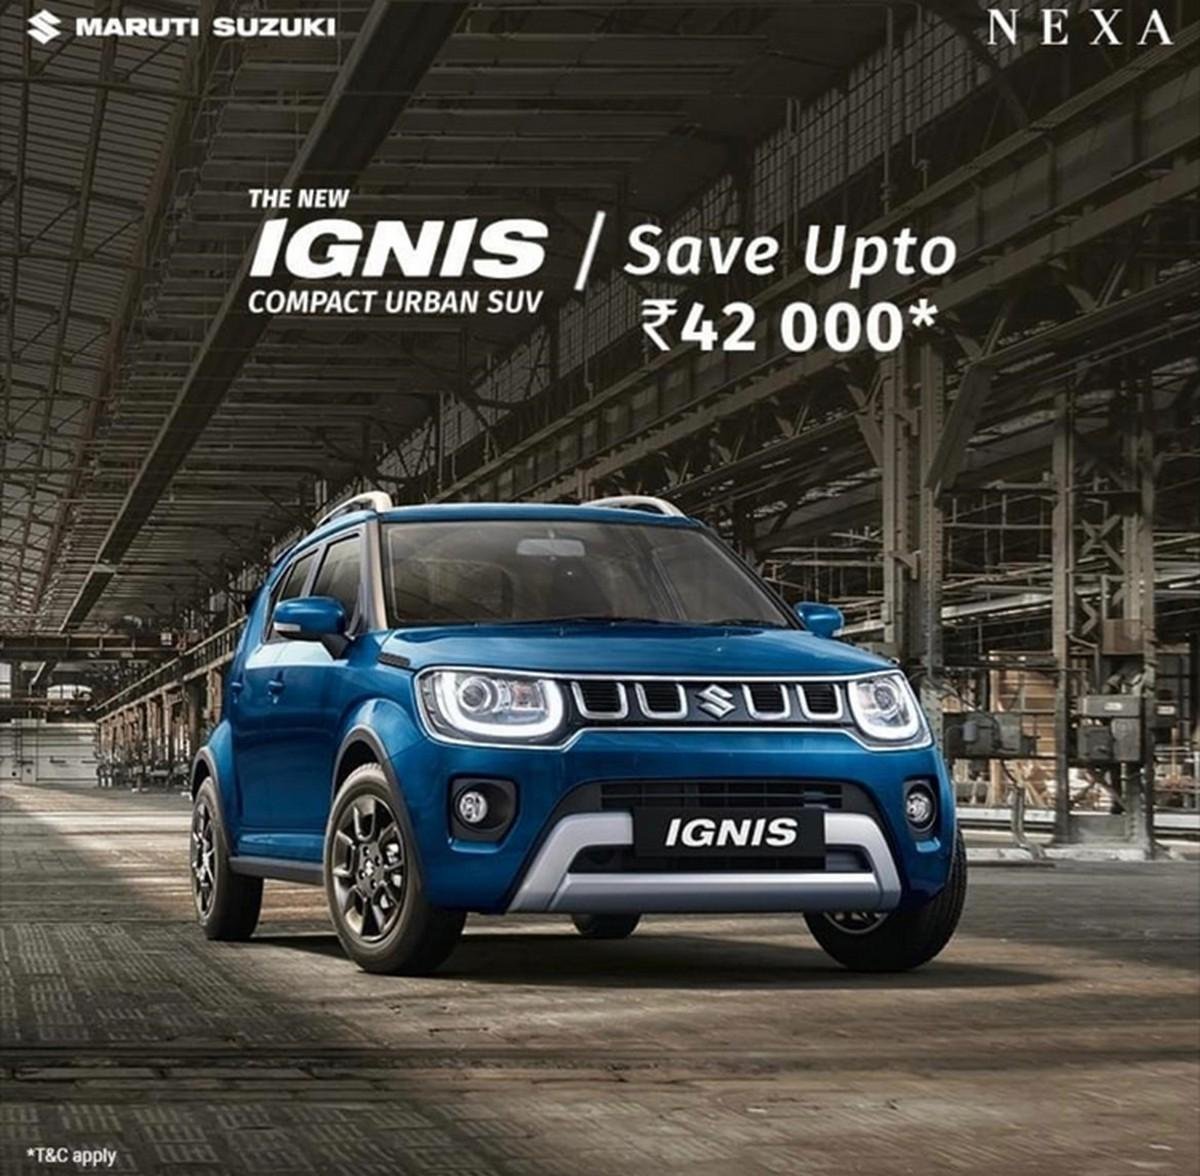 Maruti Ignis Discounts for March 2021 Include Benefits of Upto Rs 42,000